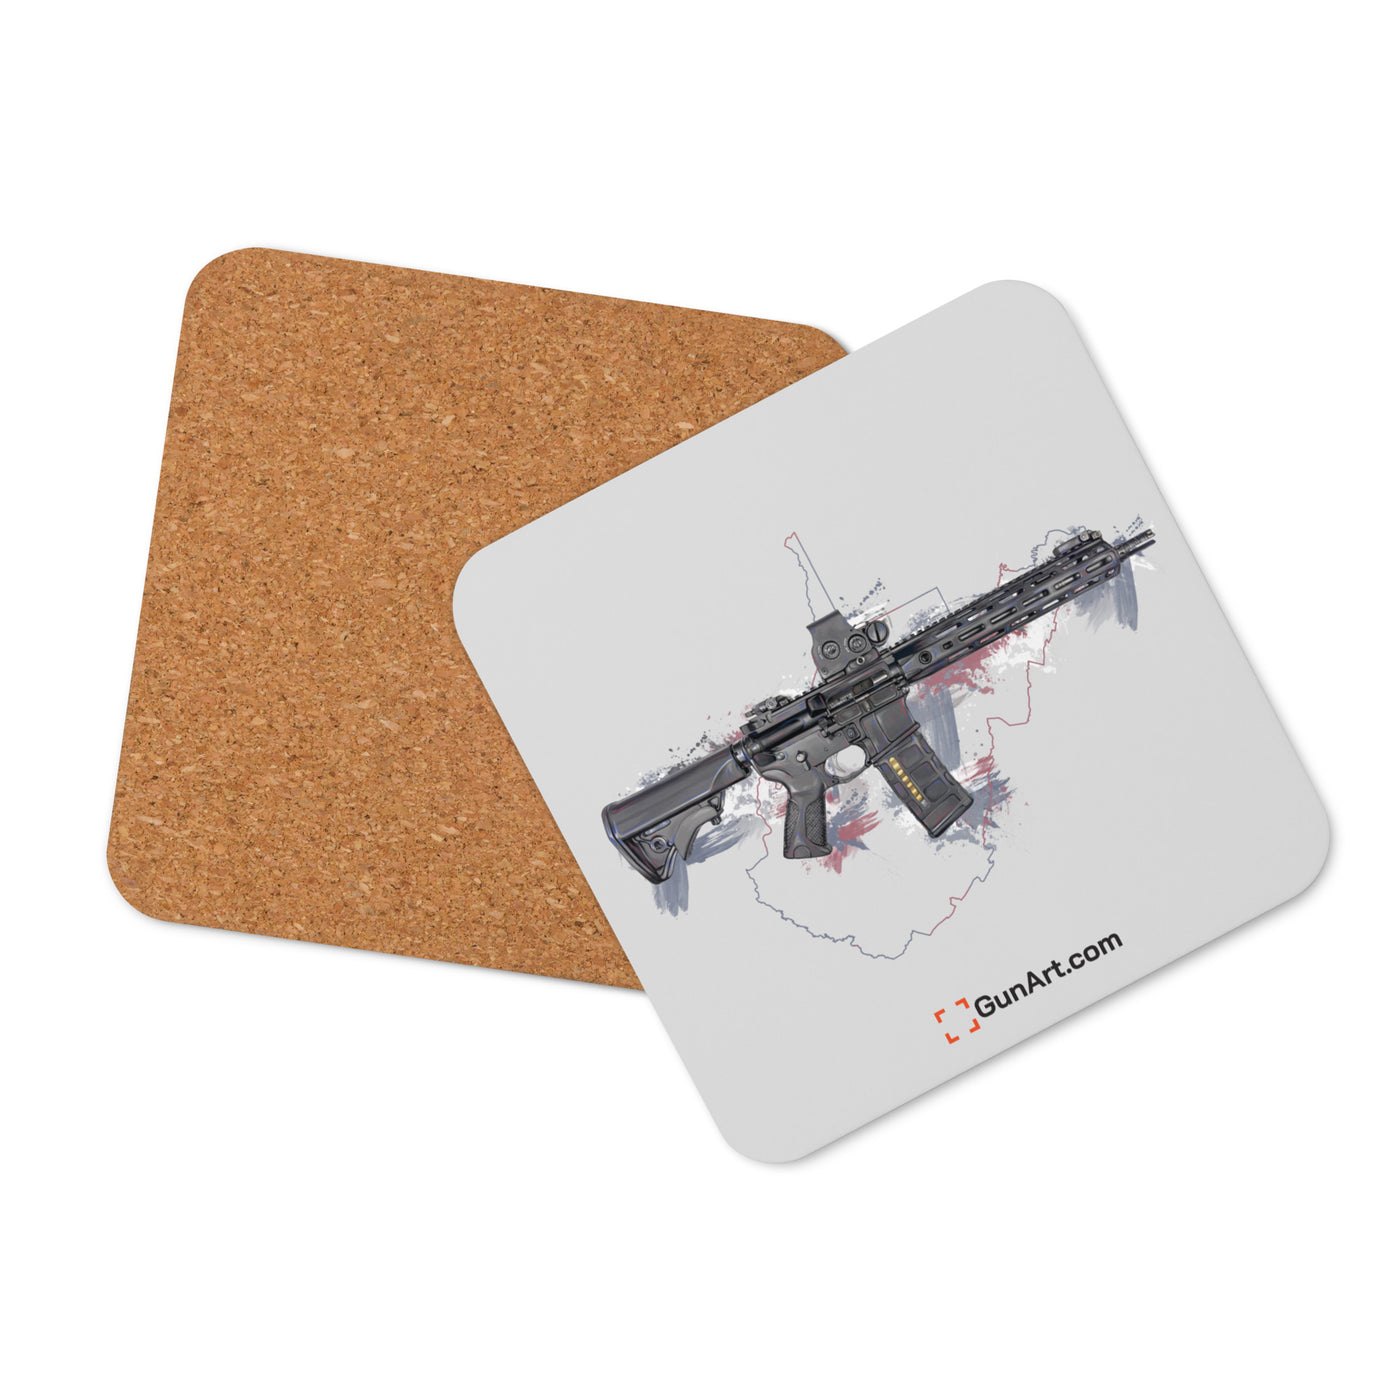 Defending Freedom - West Virginia - AR-15 State Cork-back Coaster - Colored State